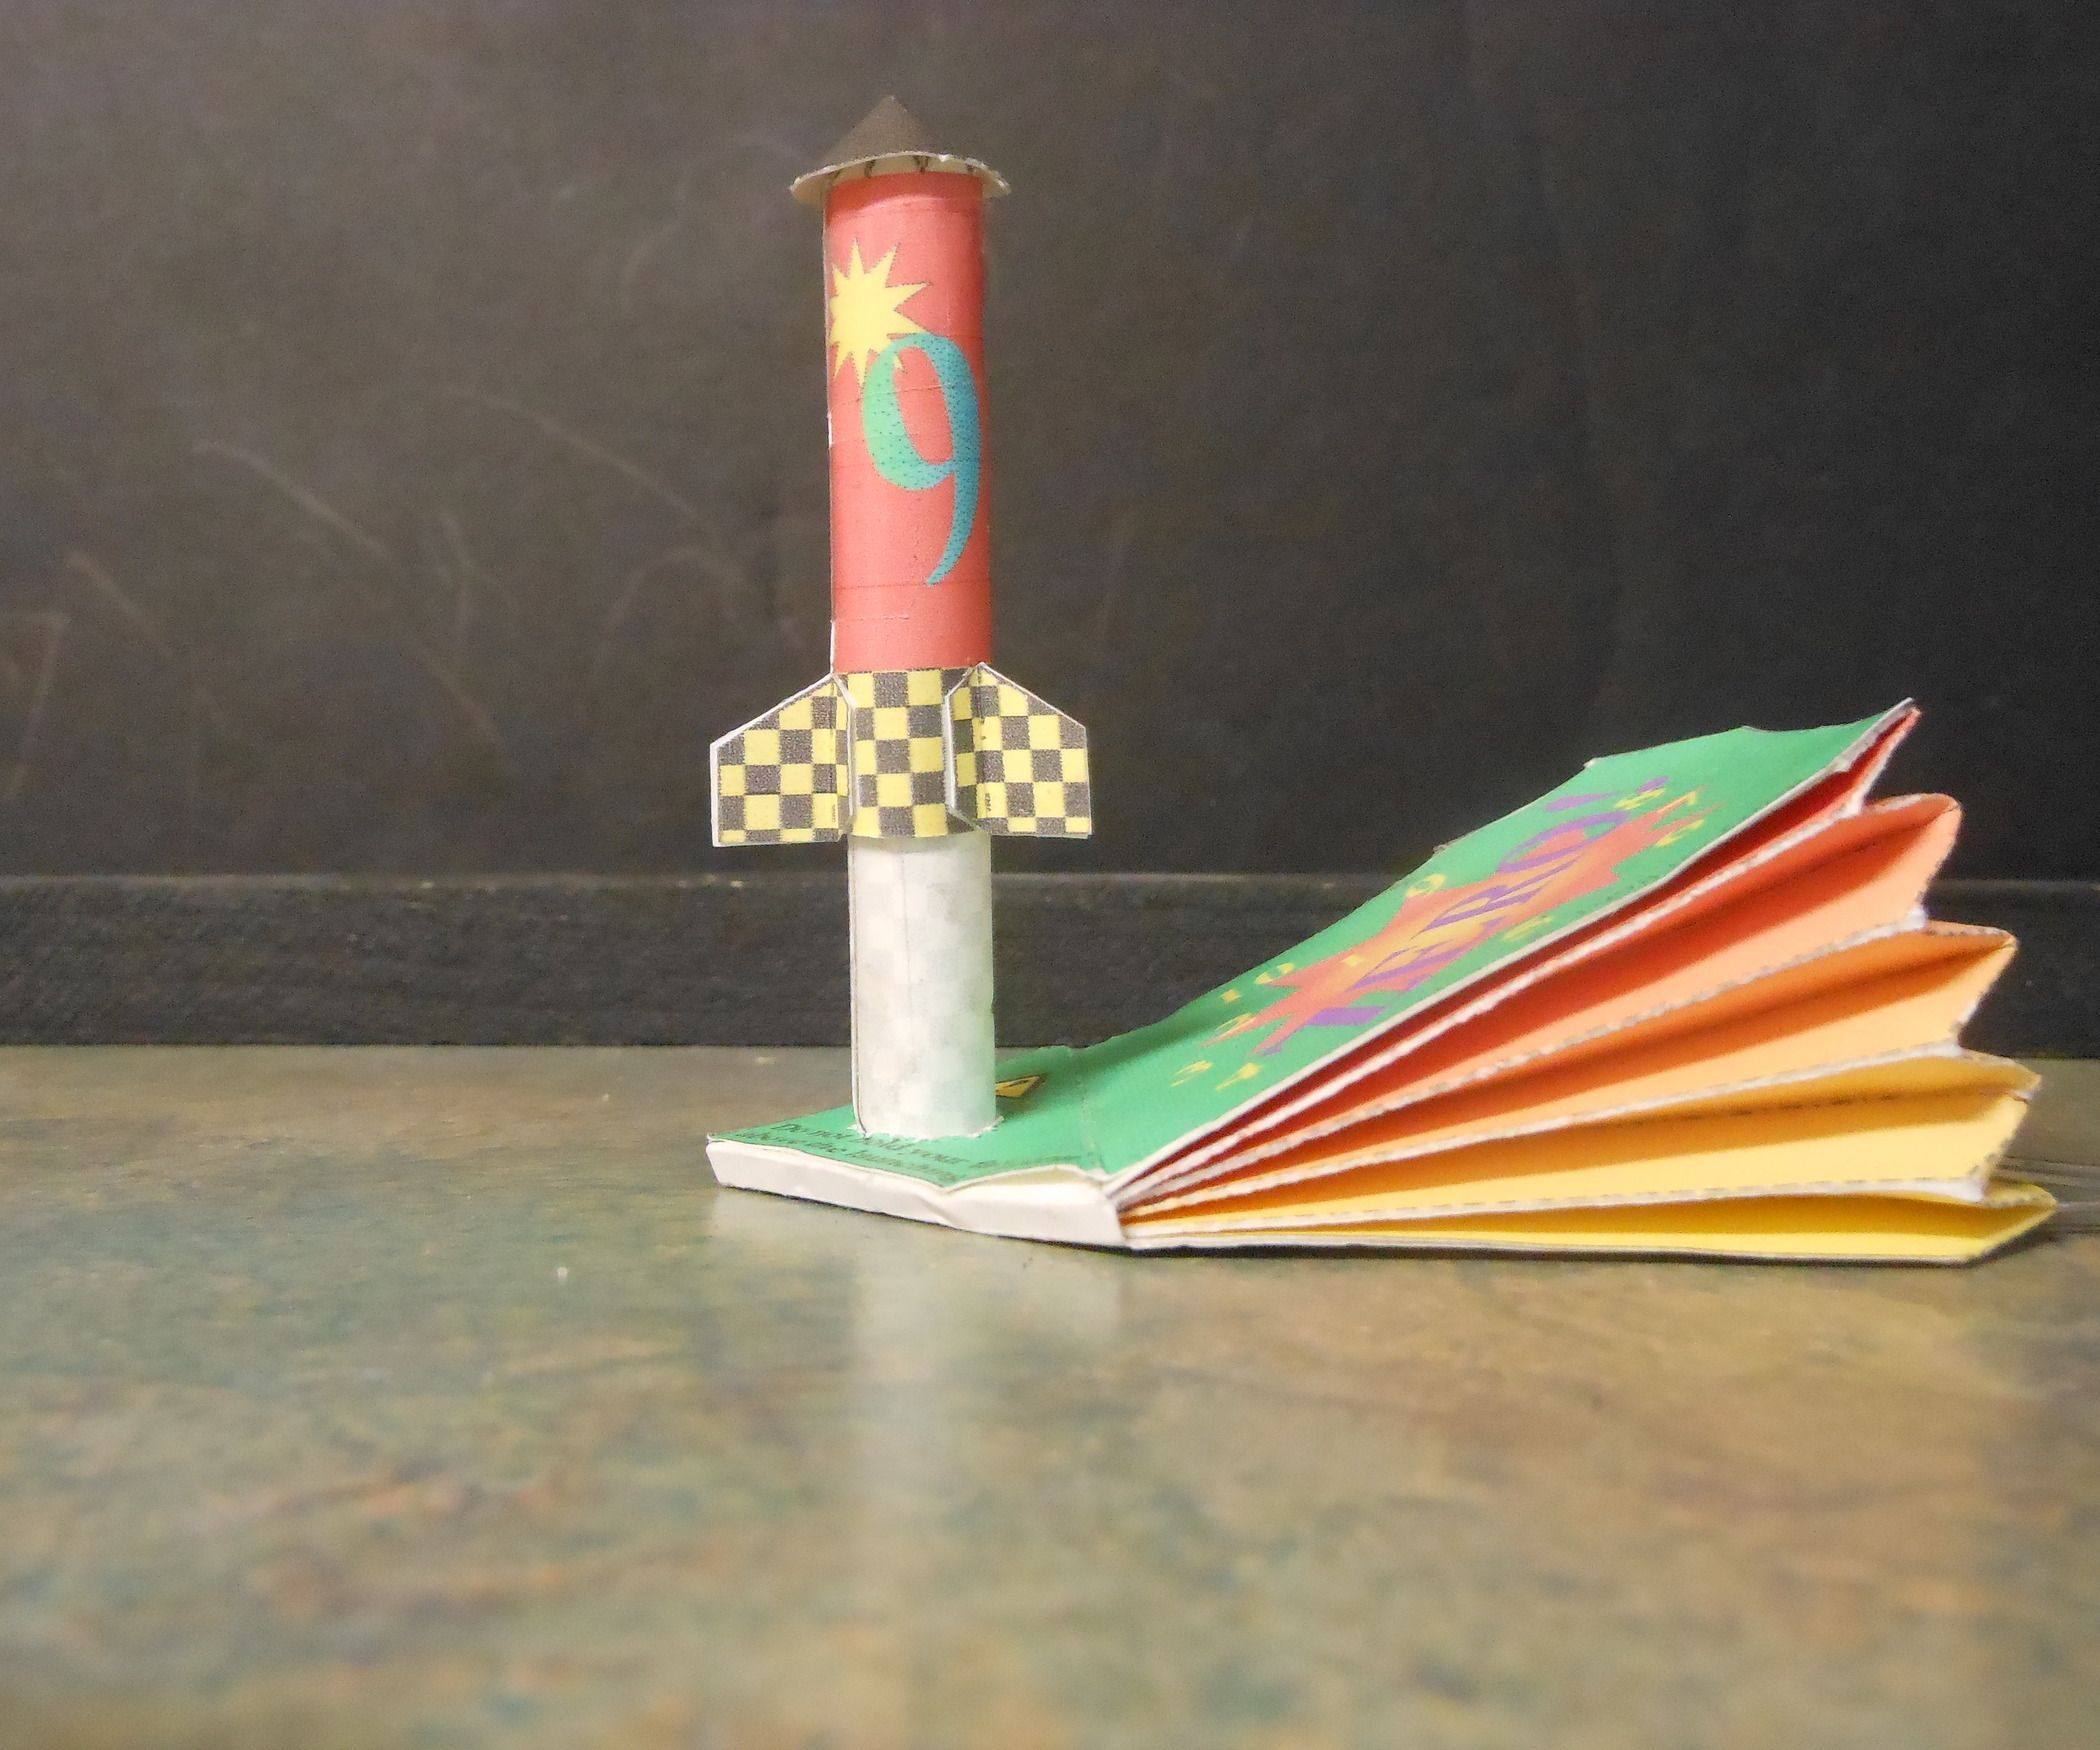 Build a Paper Rocket and Paper Launcher -   24 easy crafts for 10 year olds ideas